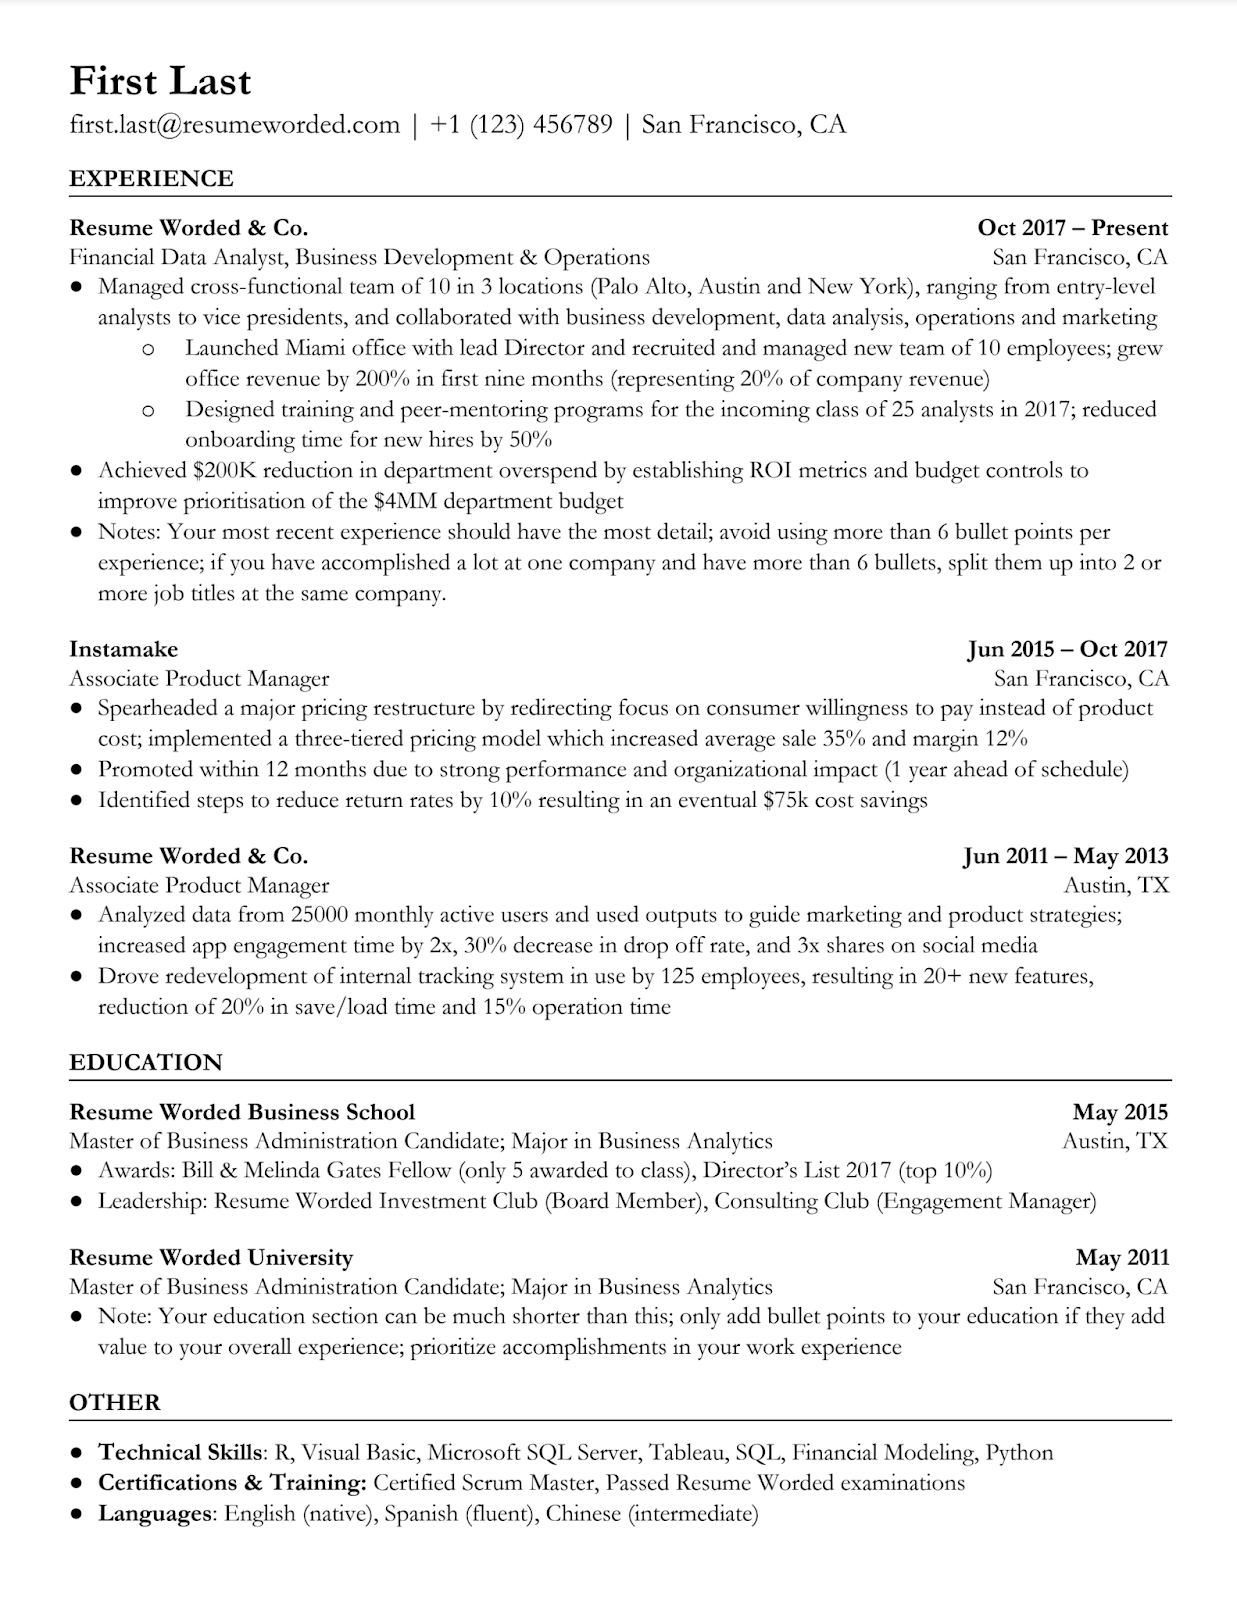 Example of a professional resume template showing right-aligned dates.